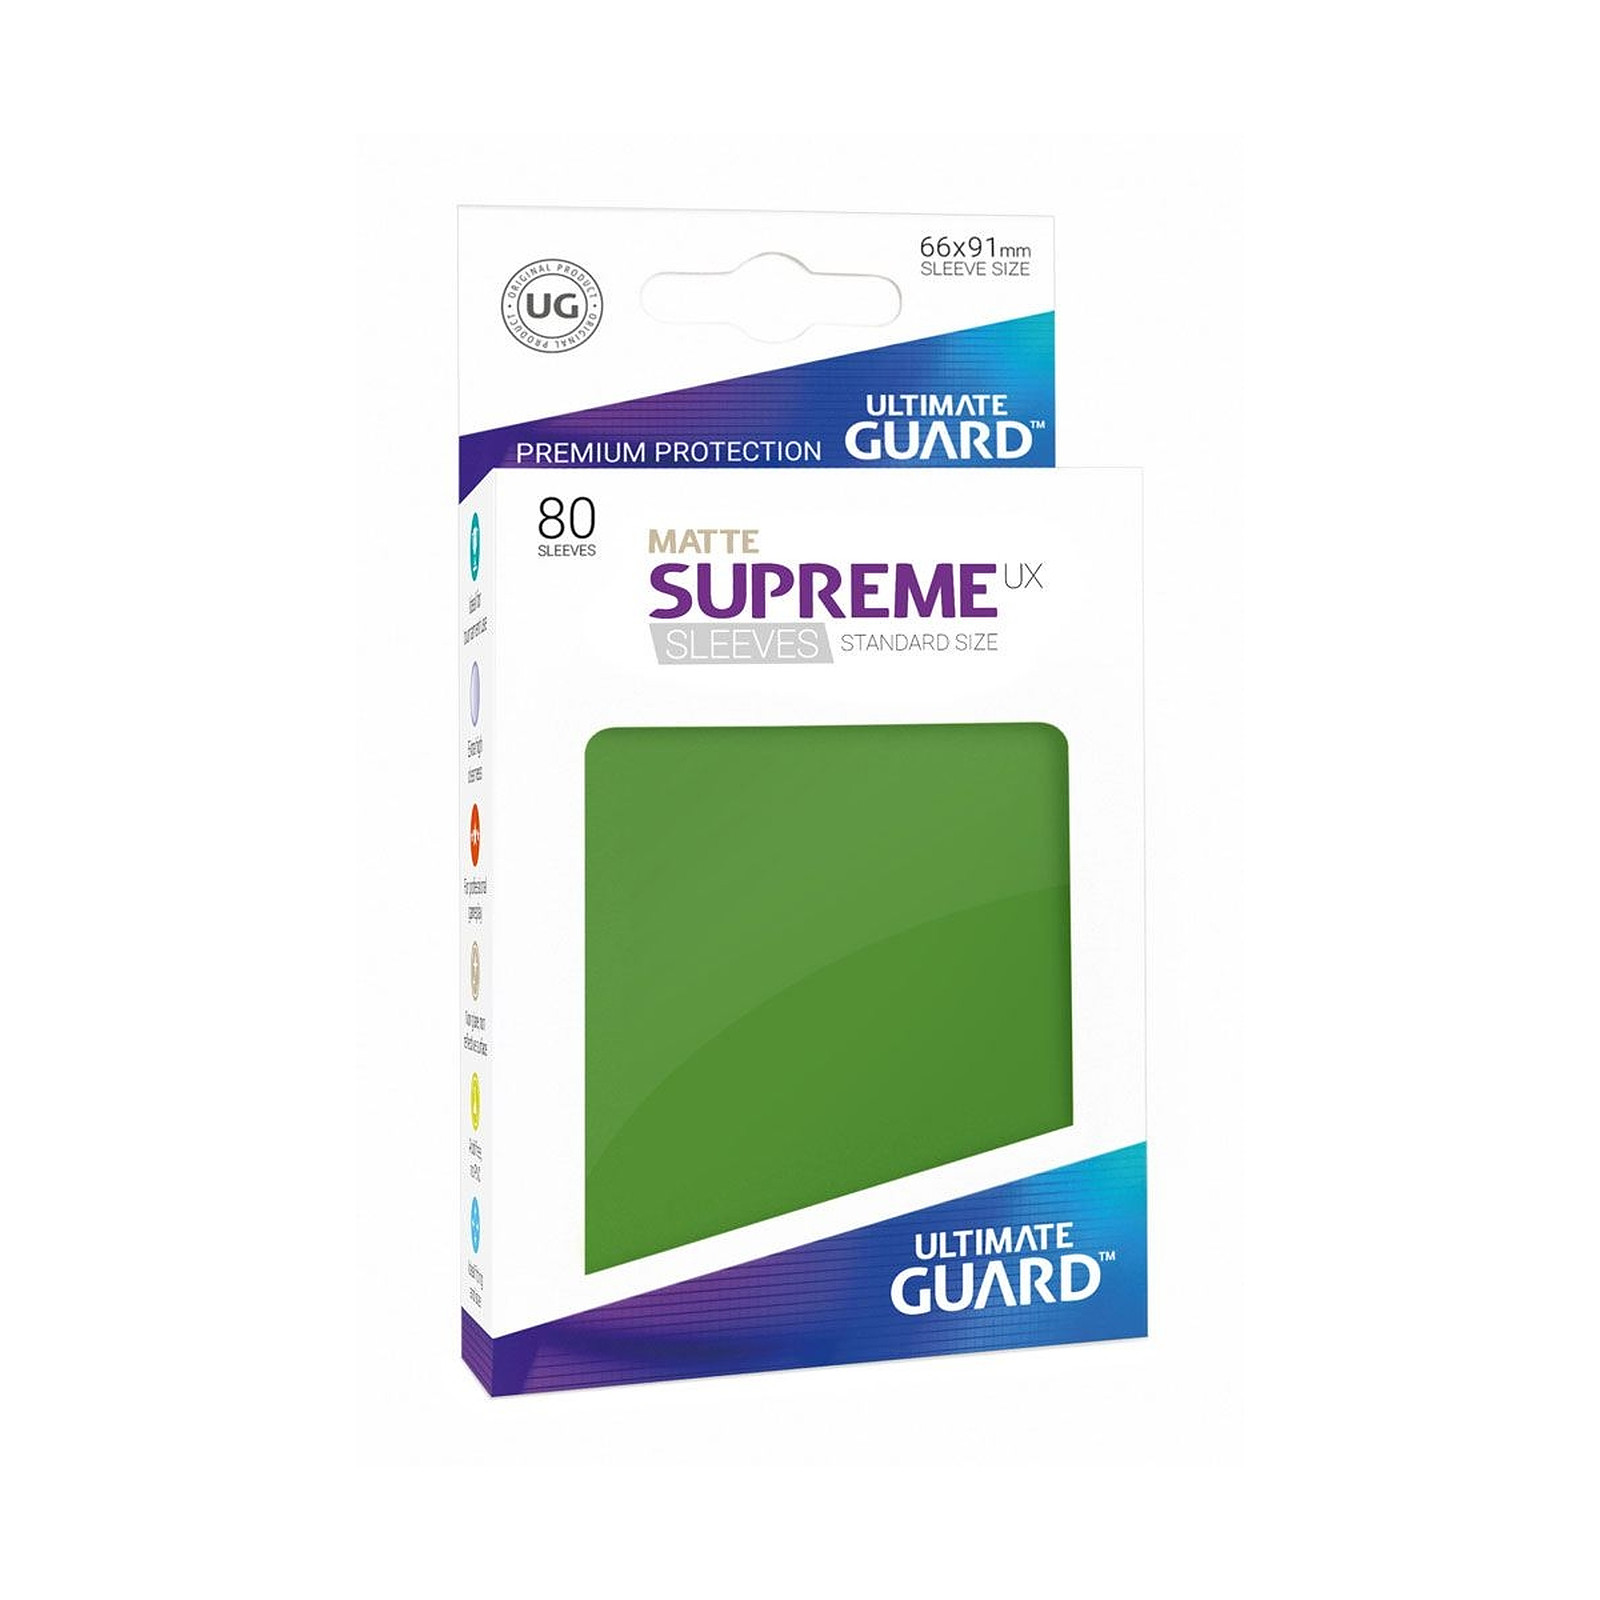 Ultimate Guard - 80 pochettes Supreme UX Sleeves taille standard Vert Mat - Accessoire jeux Ultimate Guard